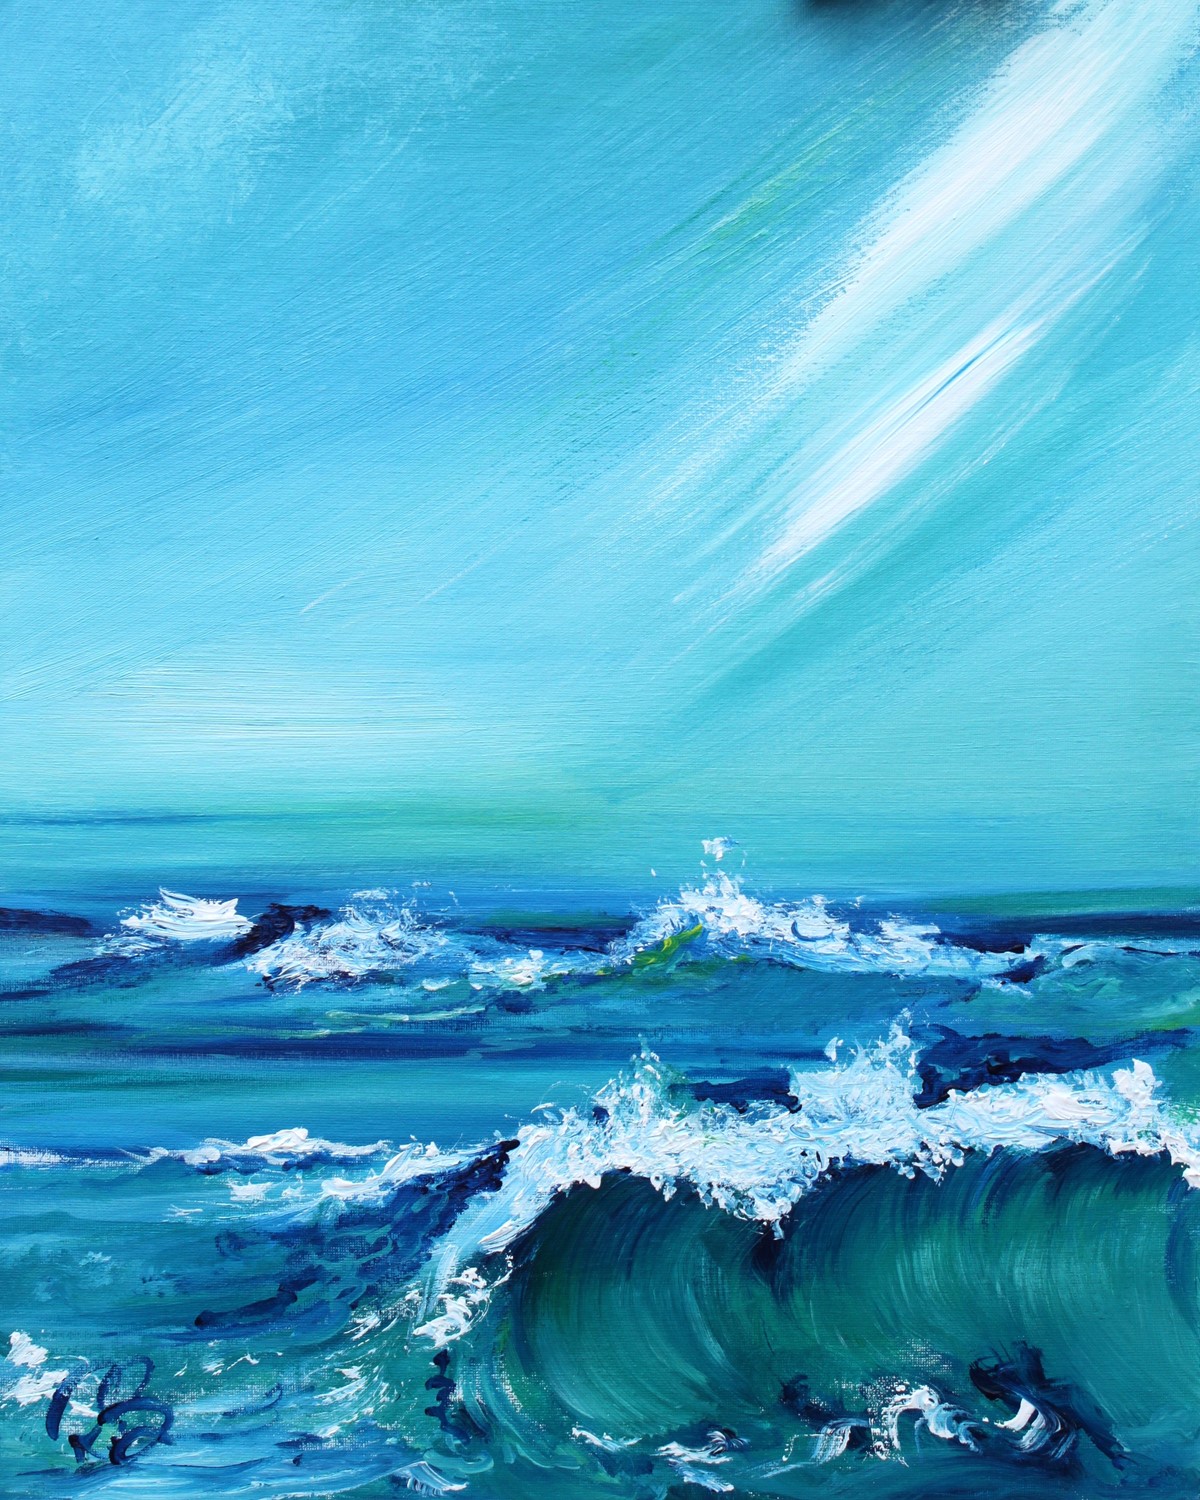 'Crest of a Wave' by artist Rosanne Barr